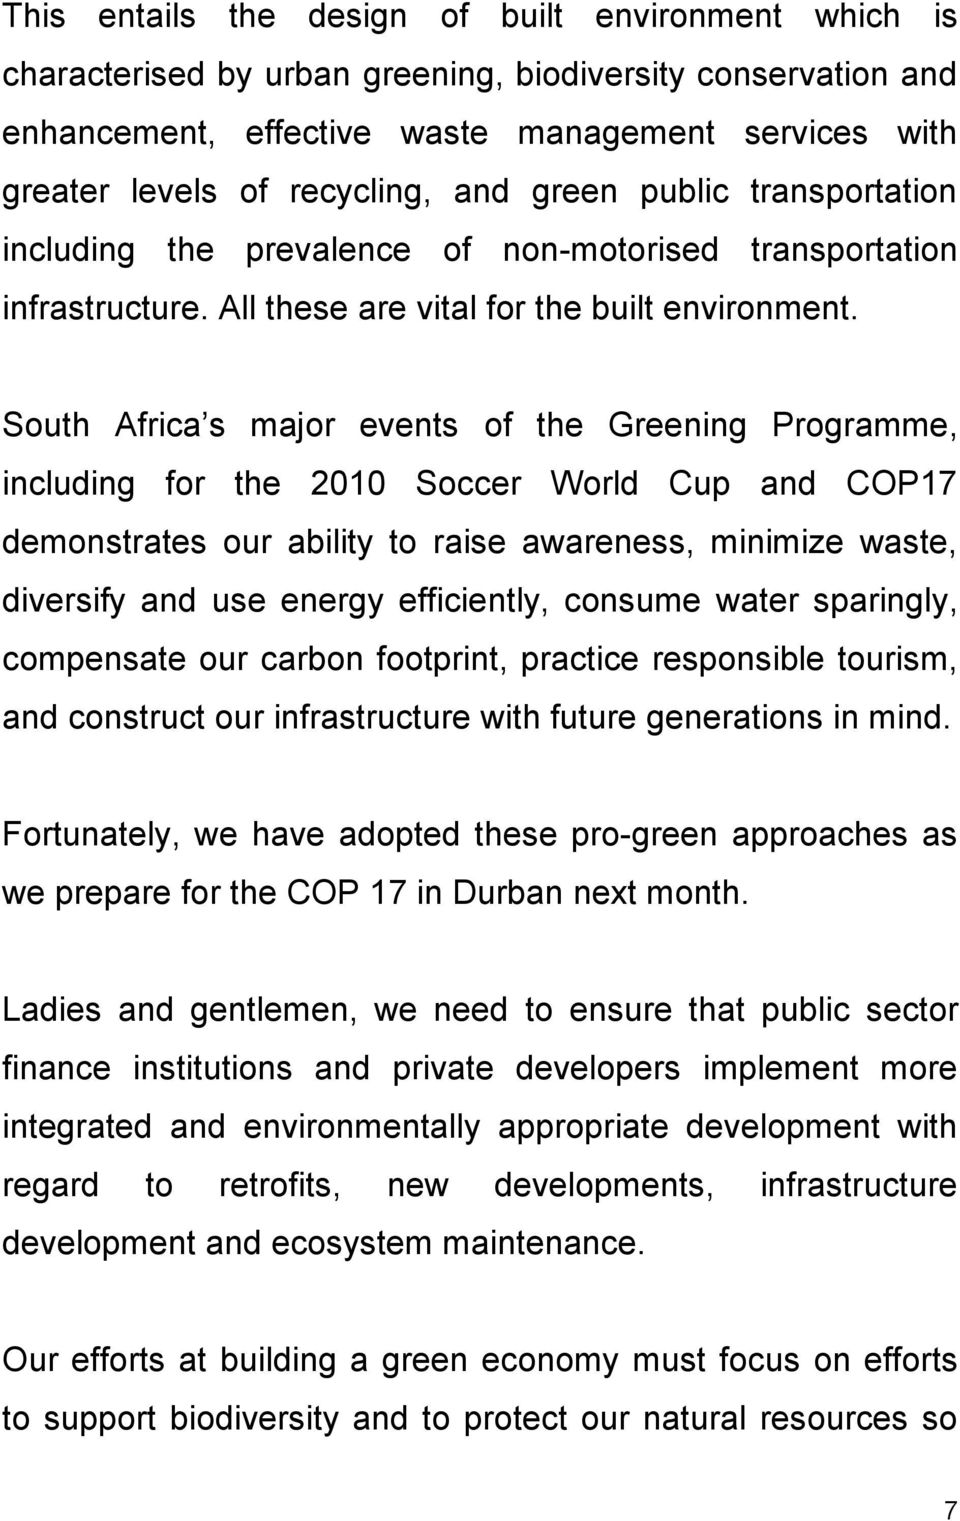 South Africa s major events of the Greening Programme, including for the 2010 Soccer World Cup and COP17 demonstrates our ability to raise awareness, minimize waste, diversify and use energy